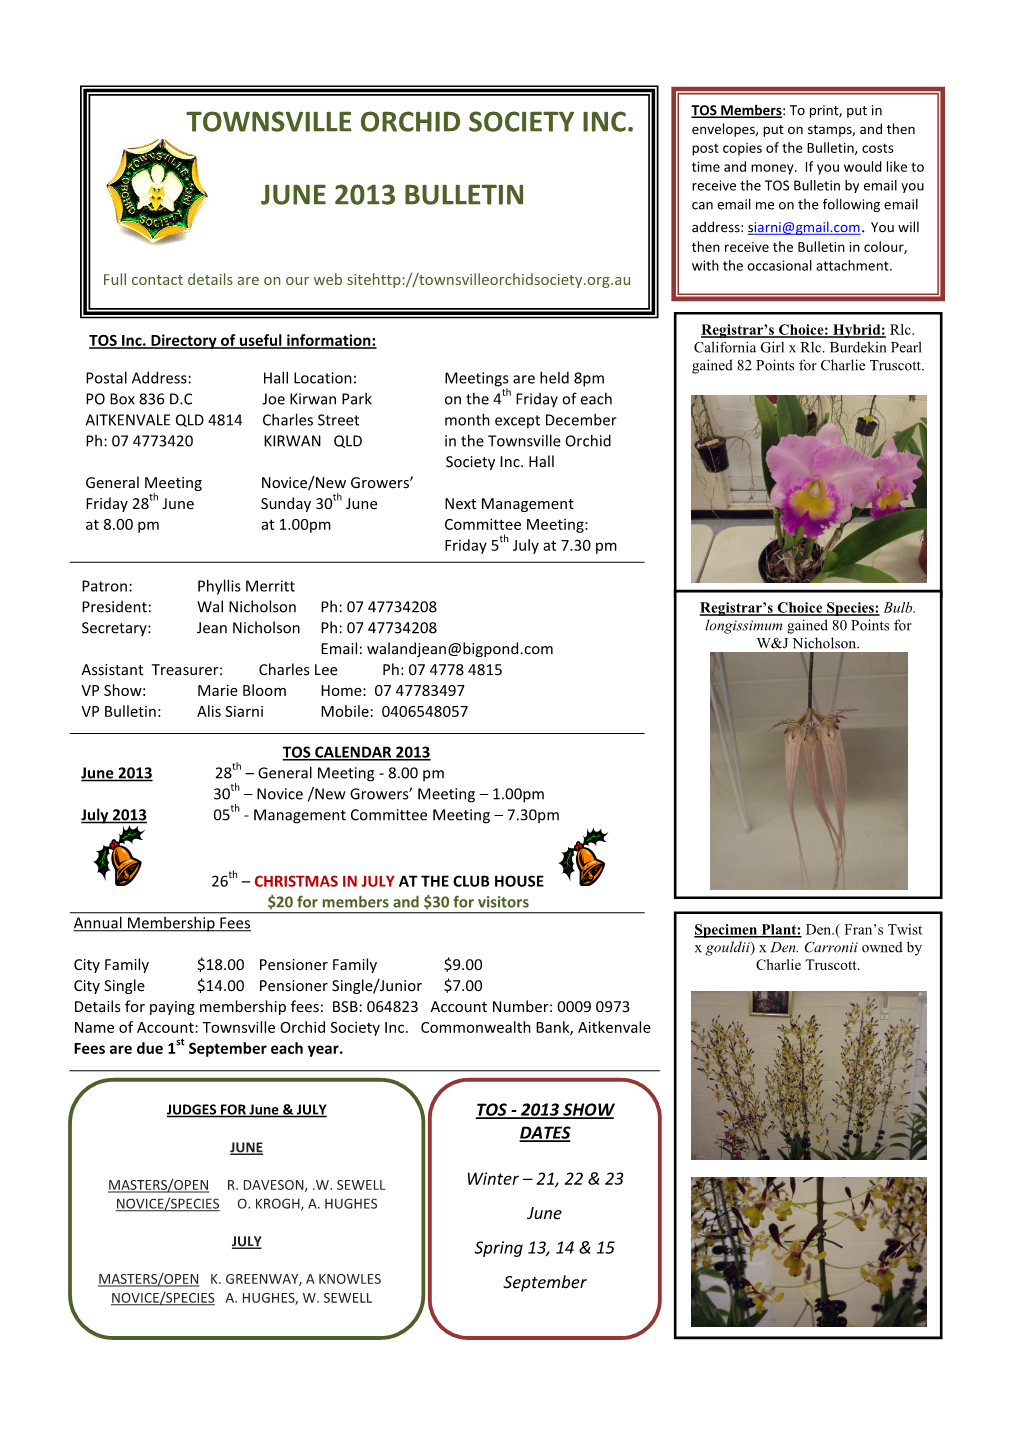 Townsville Orchid Society Inc. June 2013 Bulletin